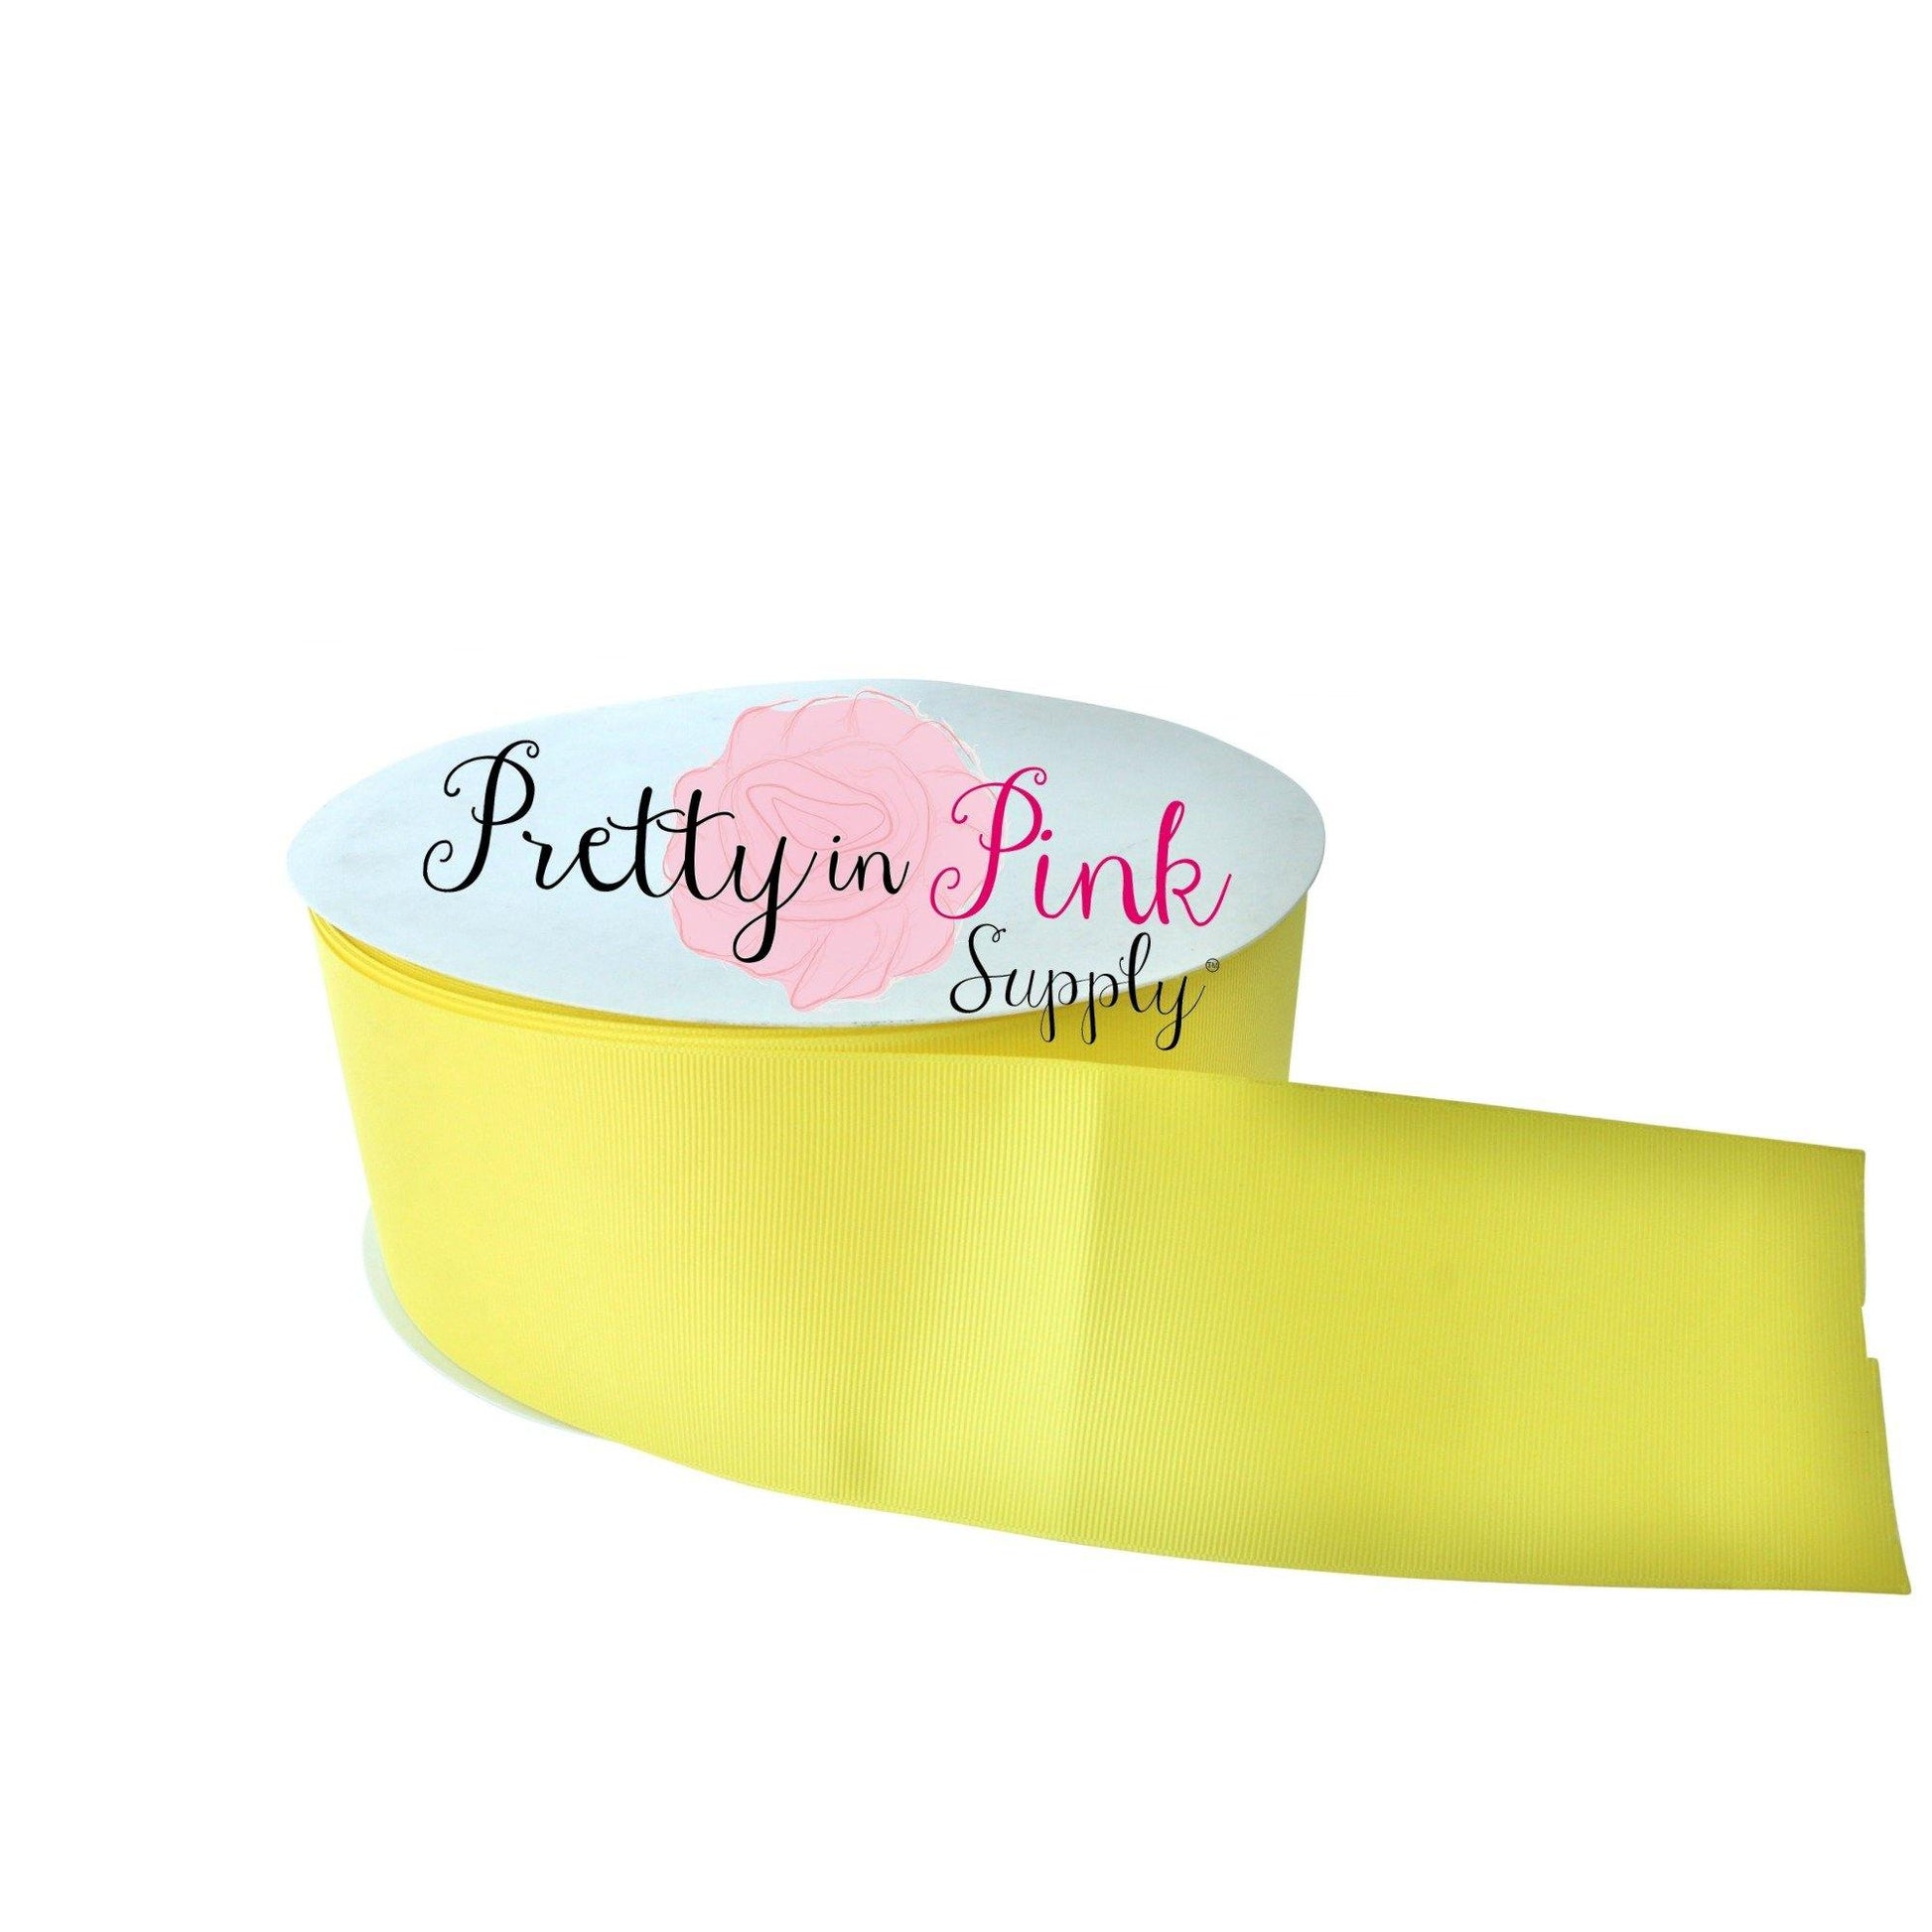 3" SOLID Yellow Grosgrain RIBBON - Pretty in Pink Supply